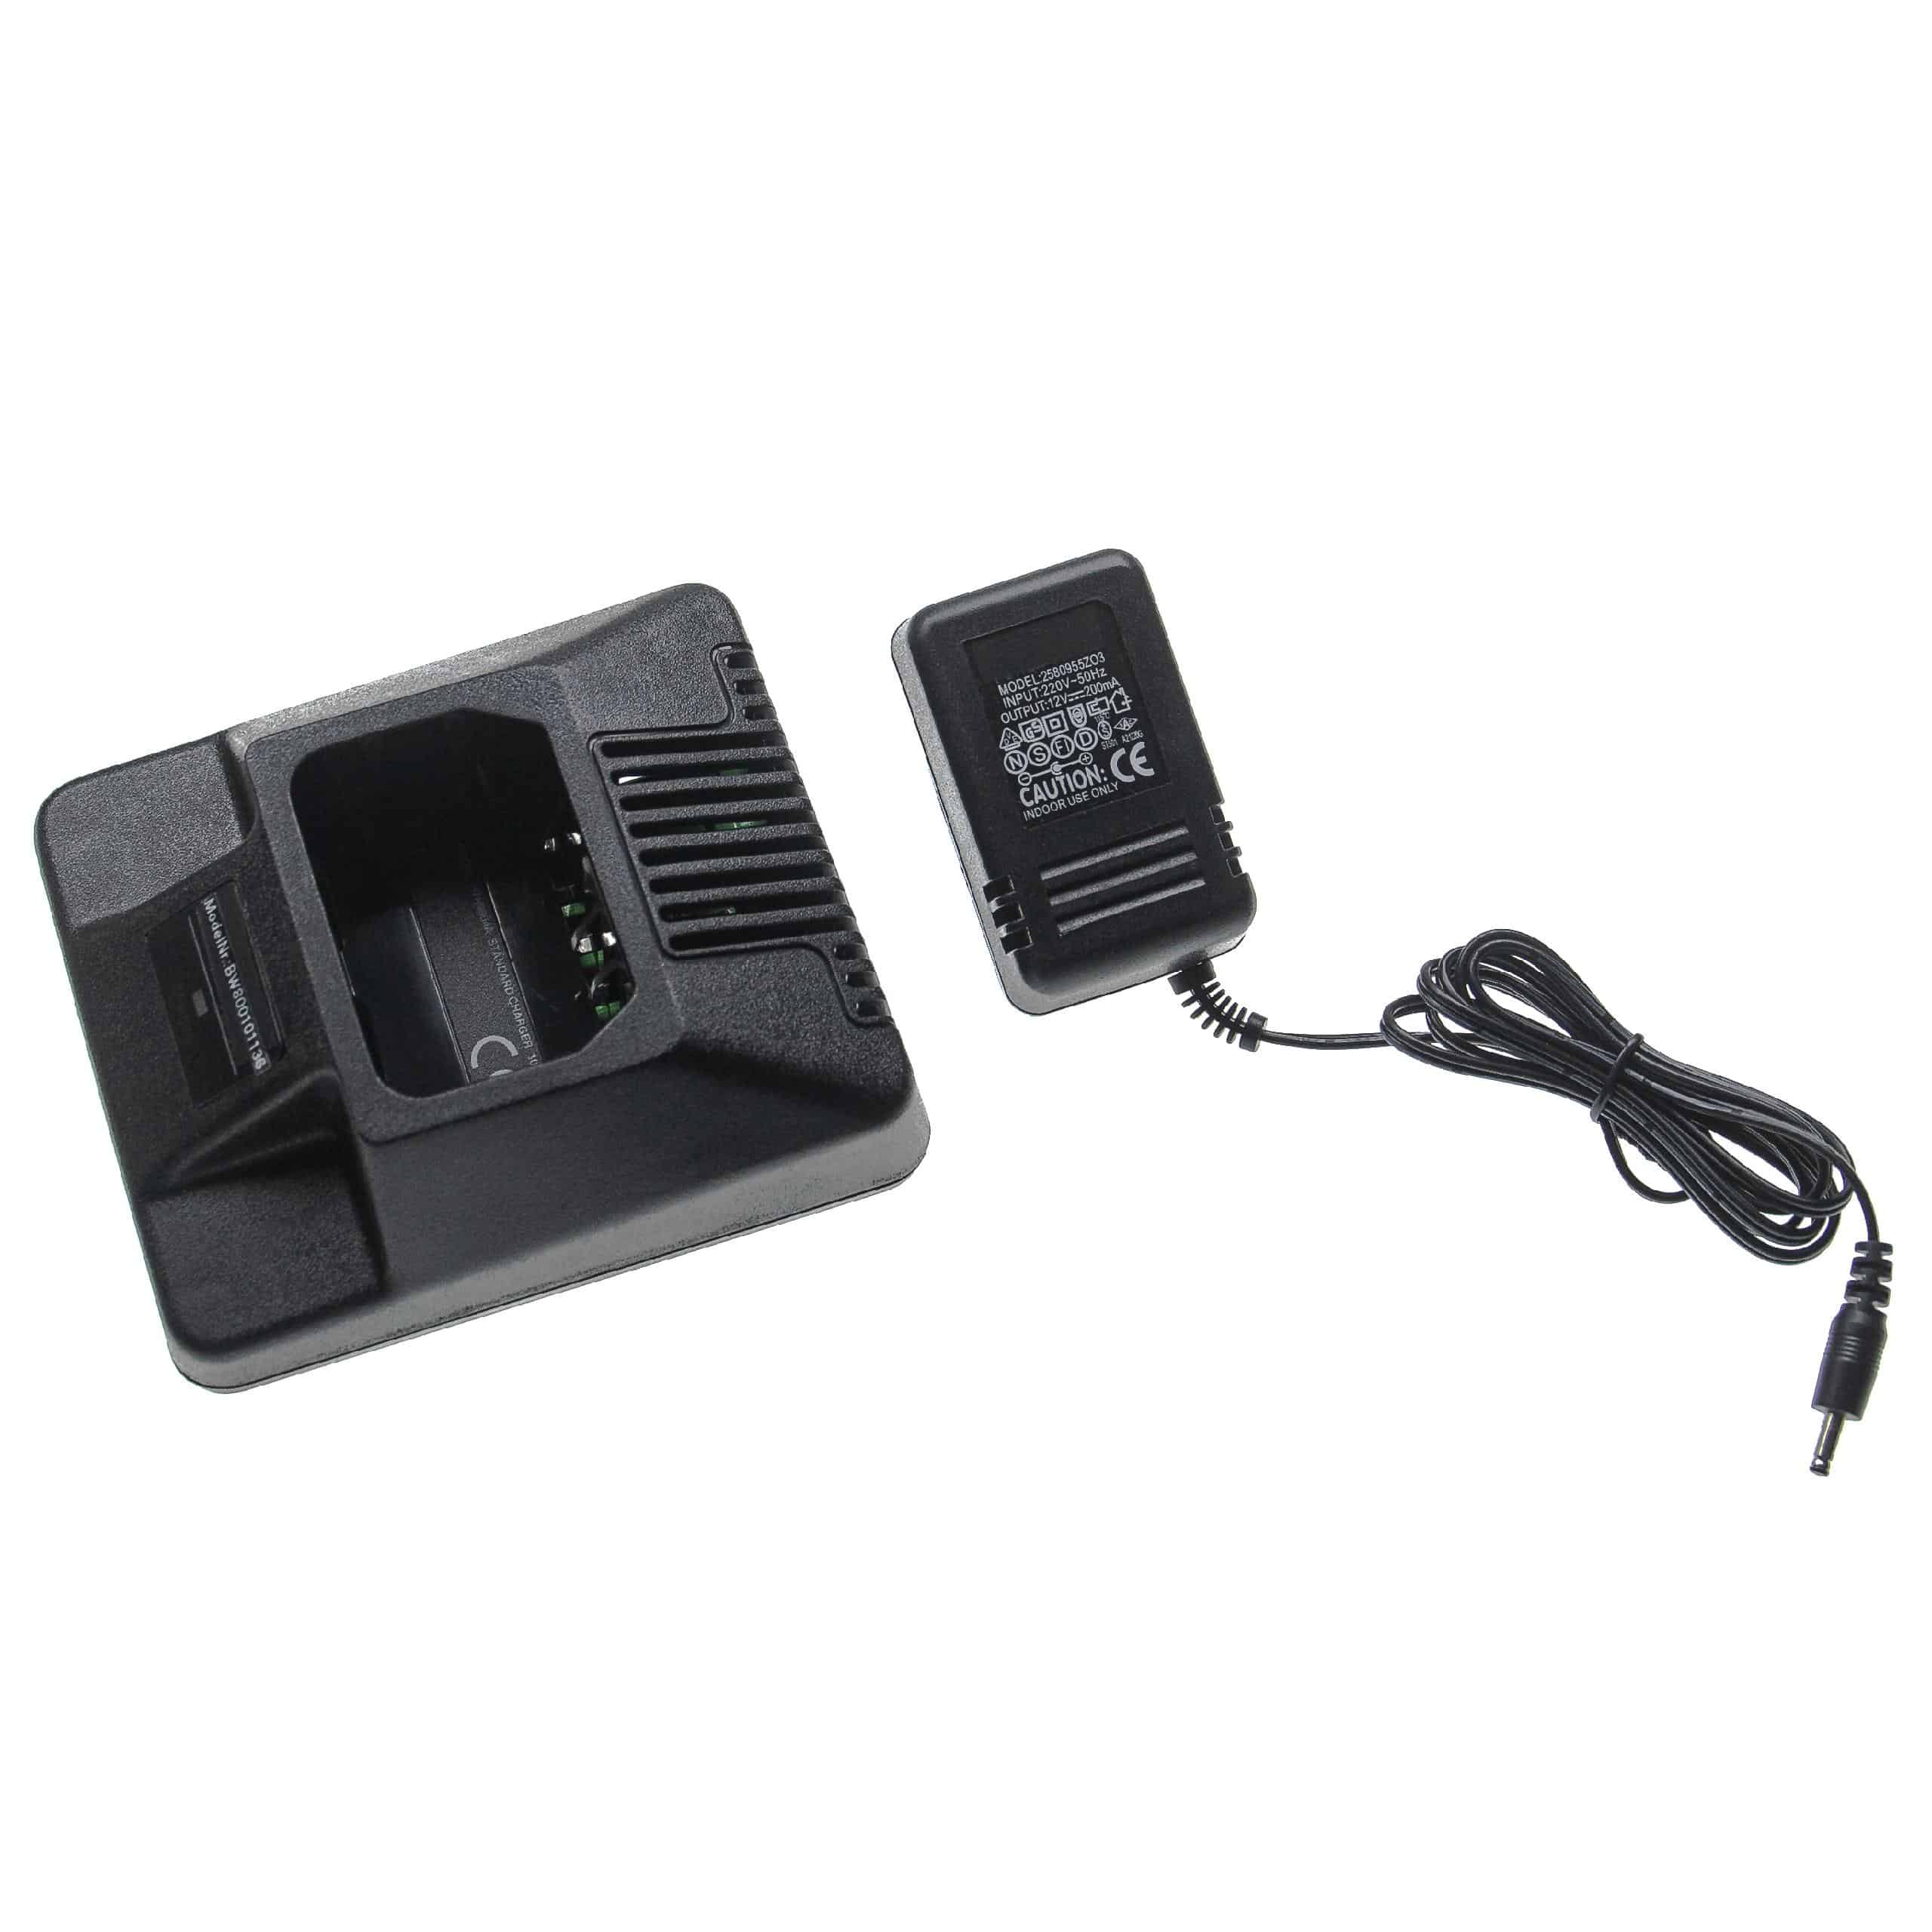 Charger + Mains Adapter Suitable for HNN 8148A Radio Batteries - 12.0 V